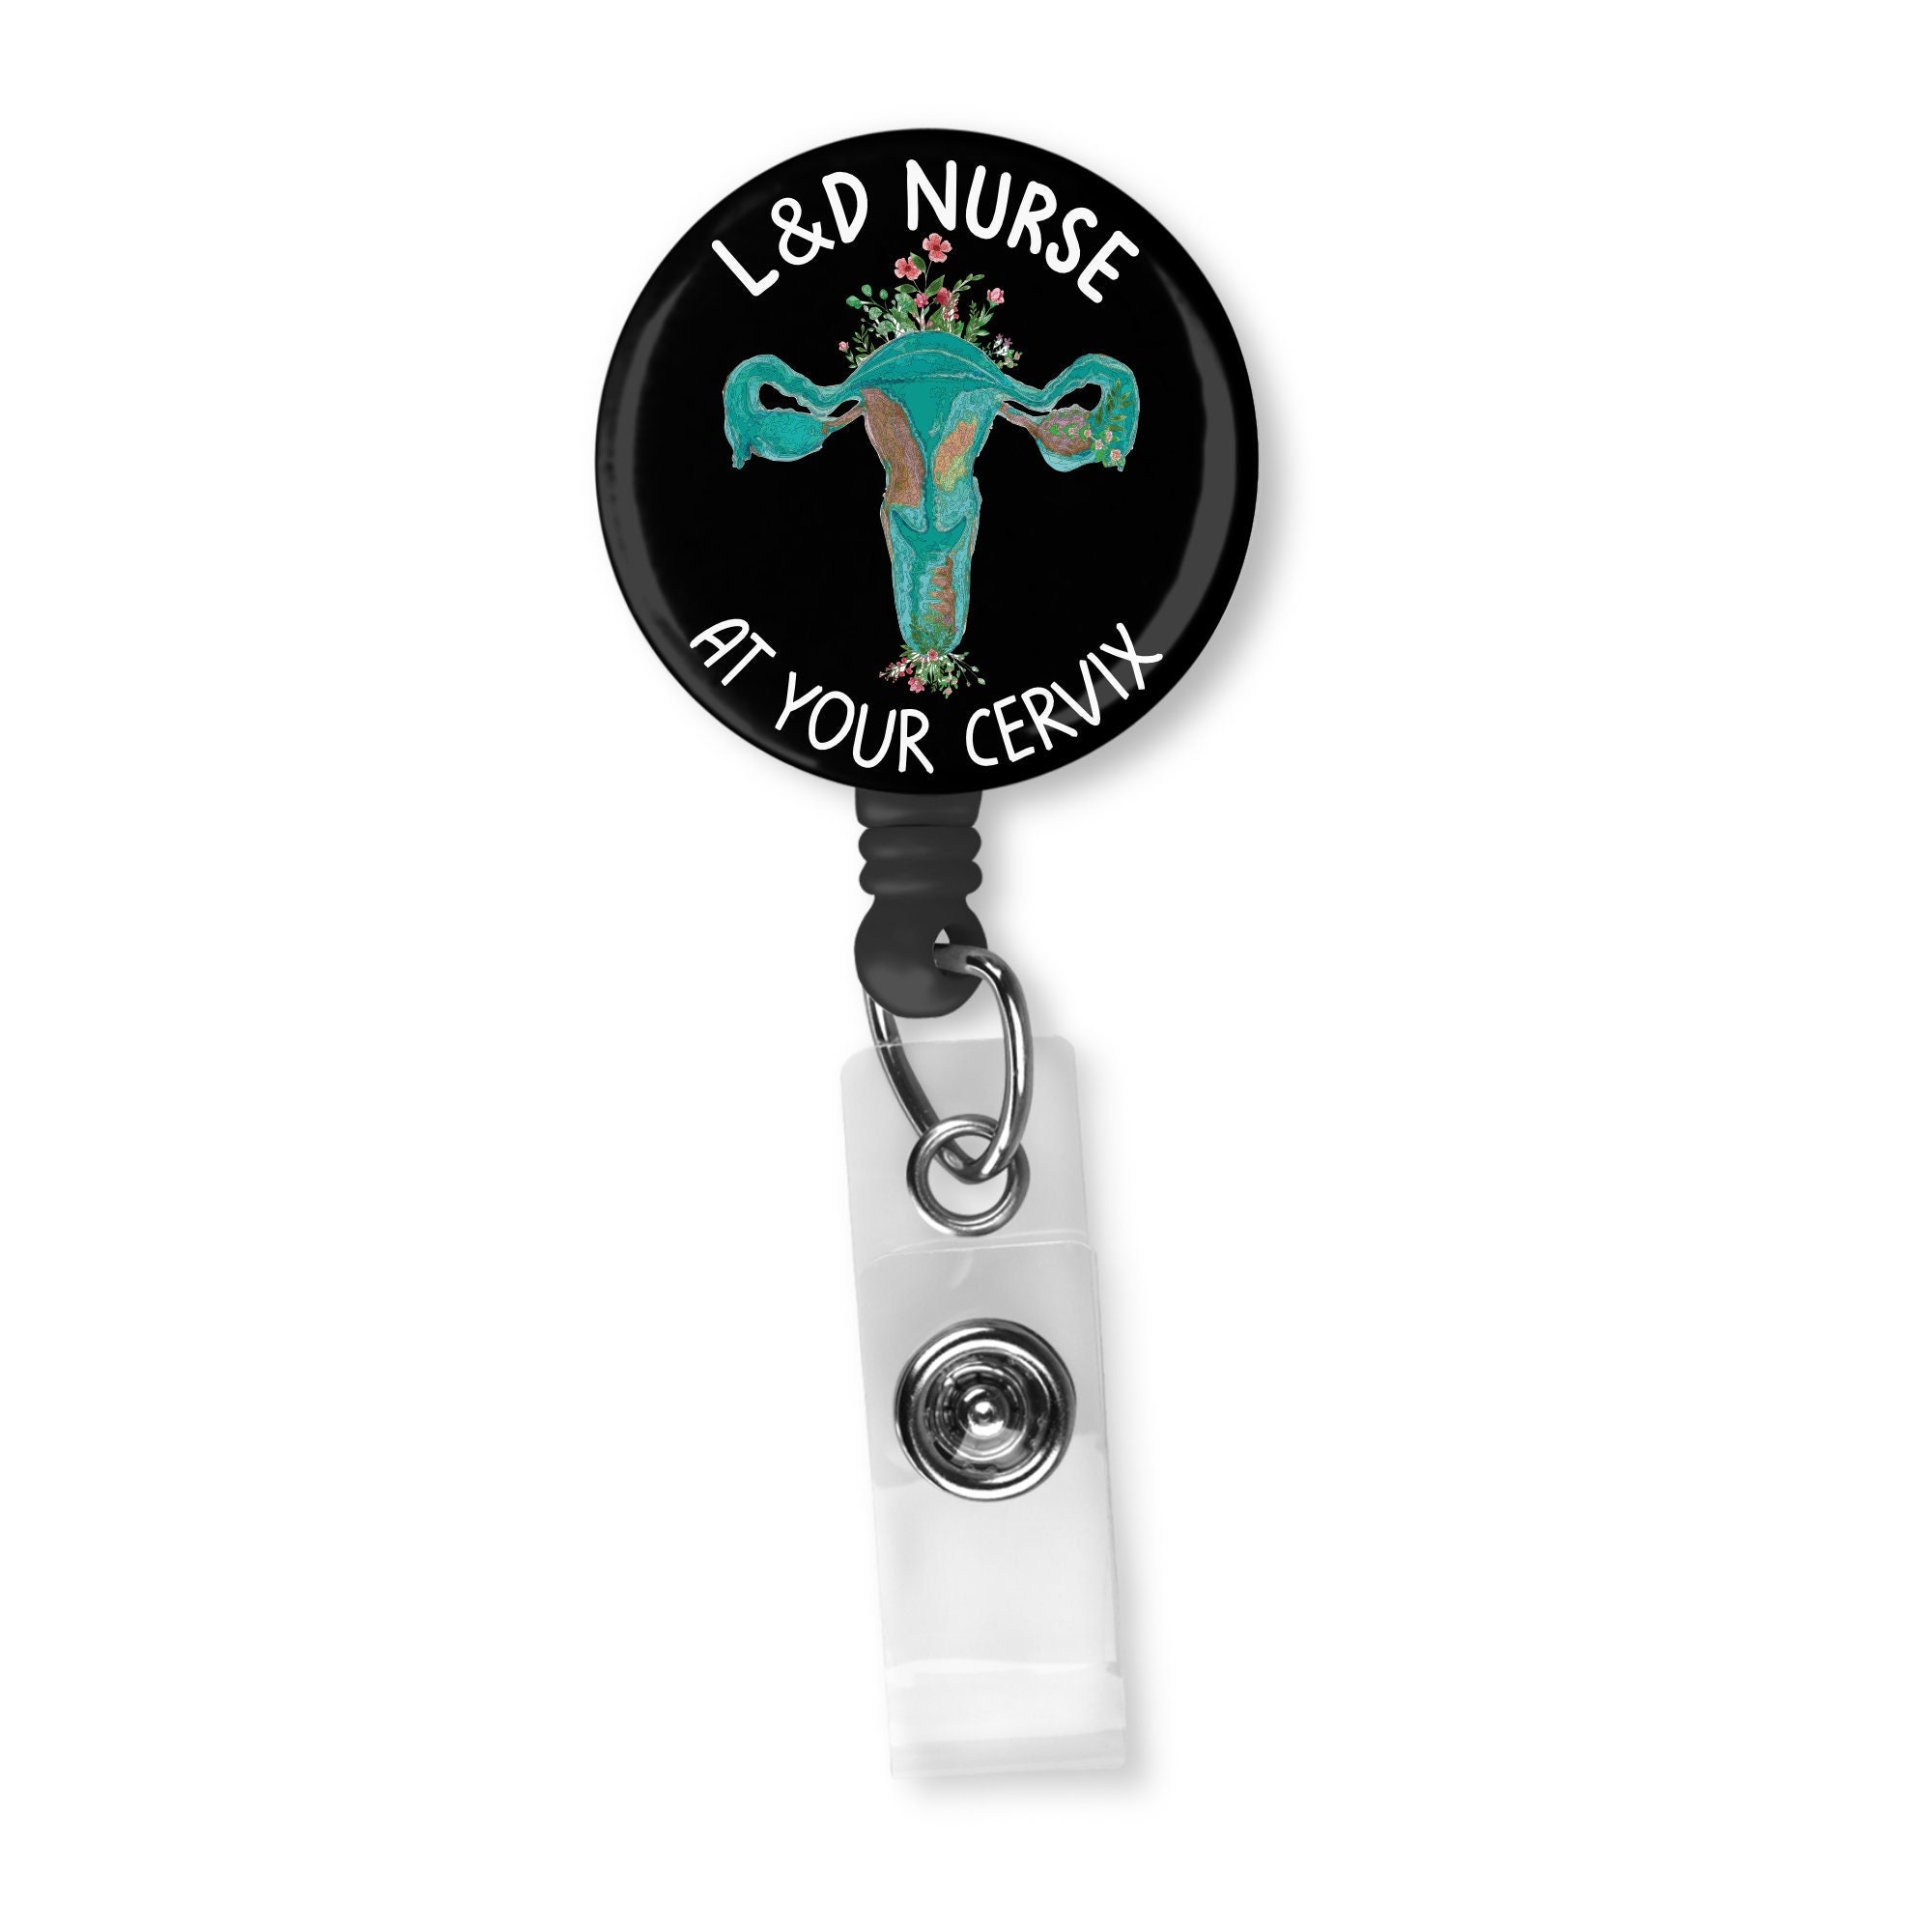 OB/GYN Personalized at Your Cervix Mint Stripes & Mint Glitter Chevron  Button Badge Reel Retractable Alligator or Slide Clip Funny 